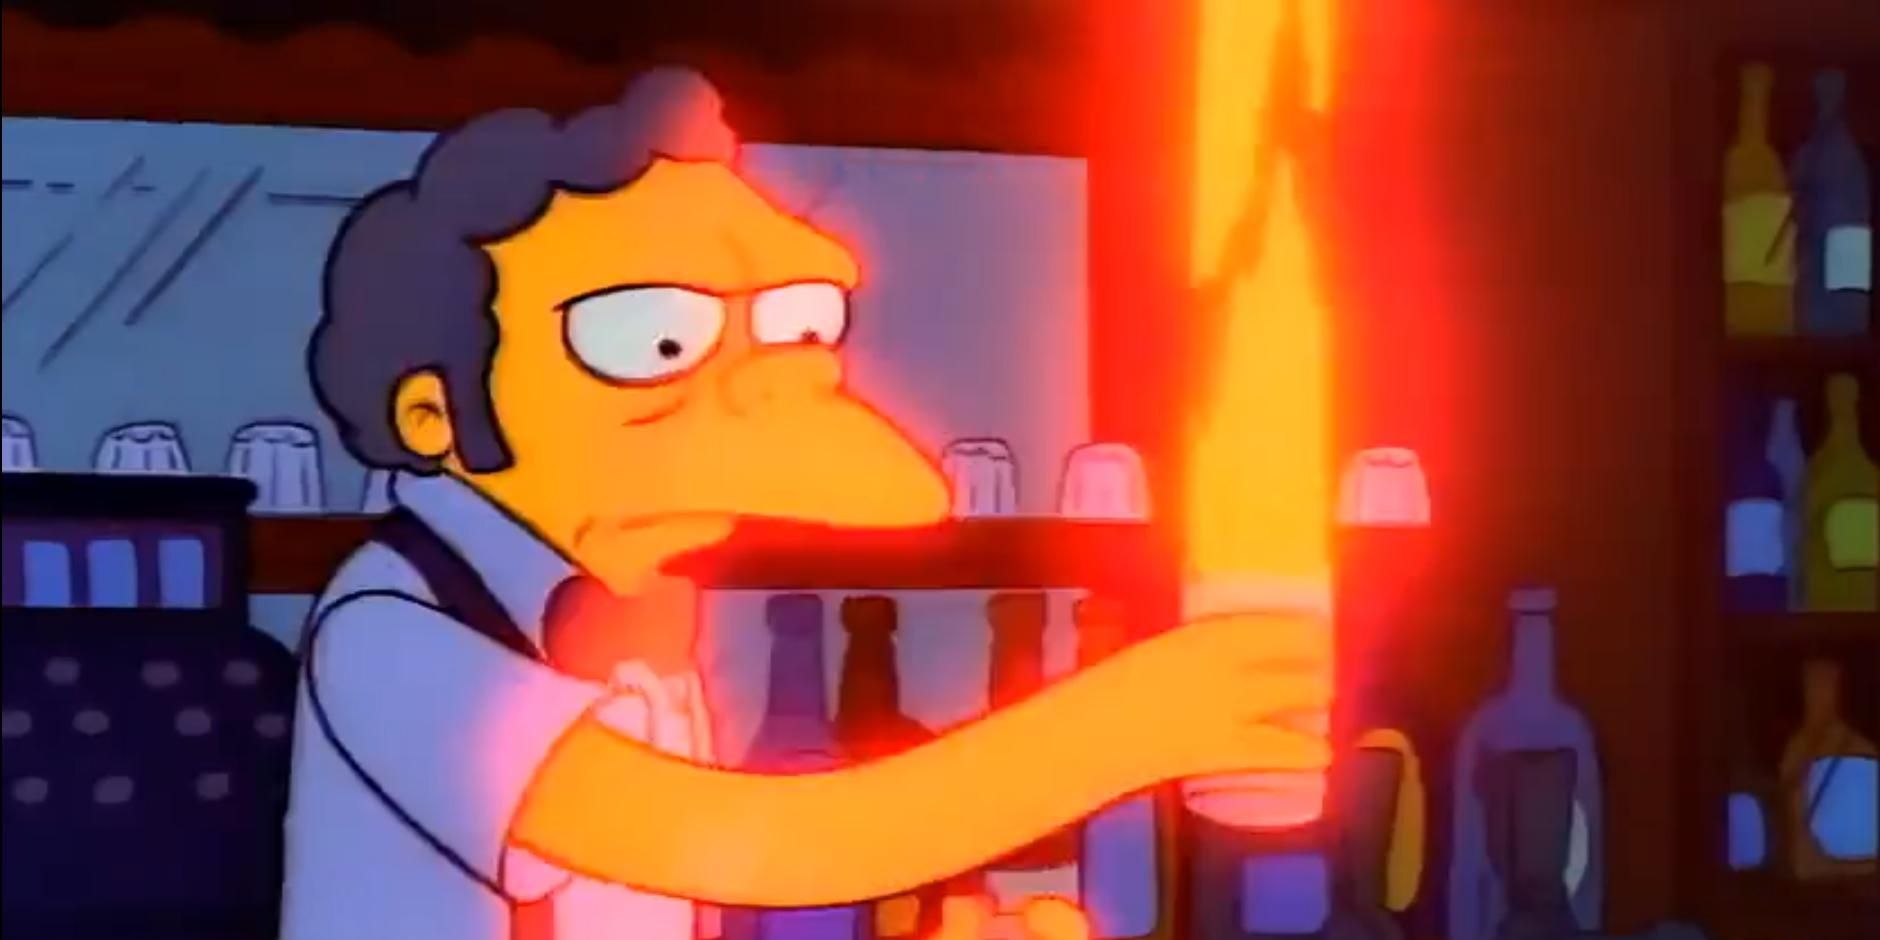 Moe makes the Flaming Moe drink whose recipe he stole from Homer